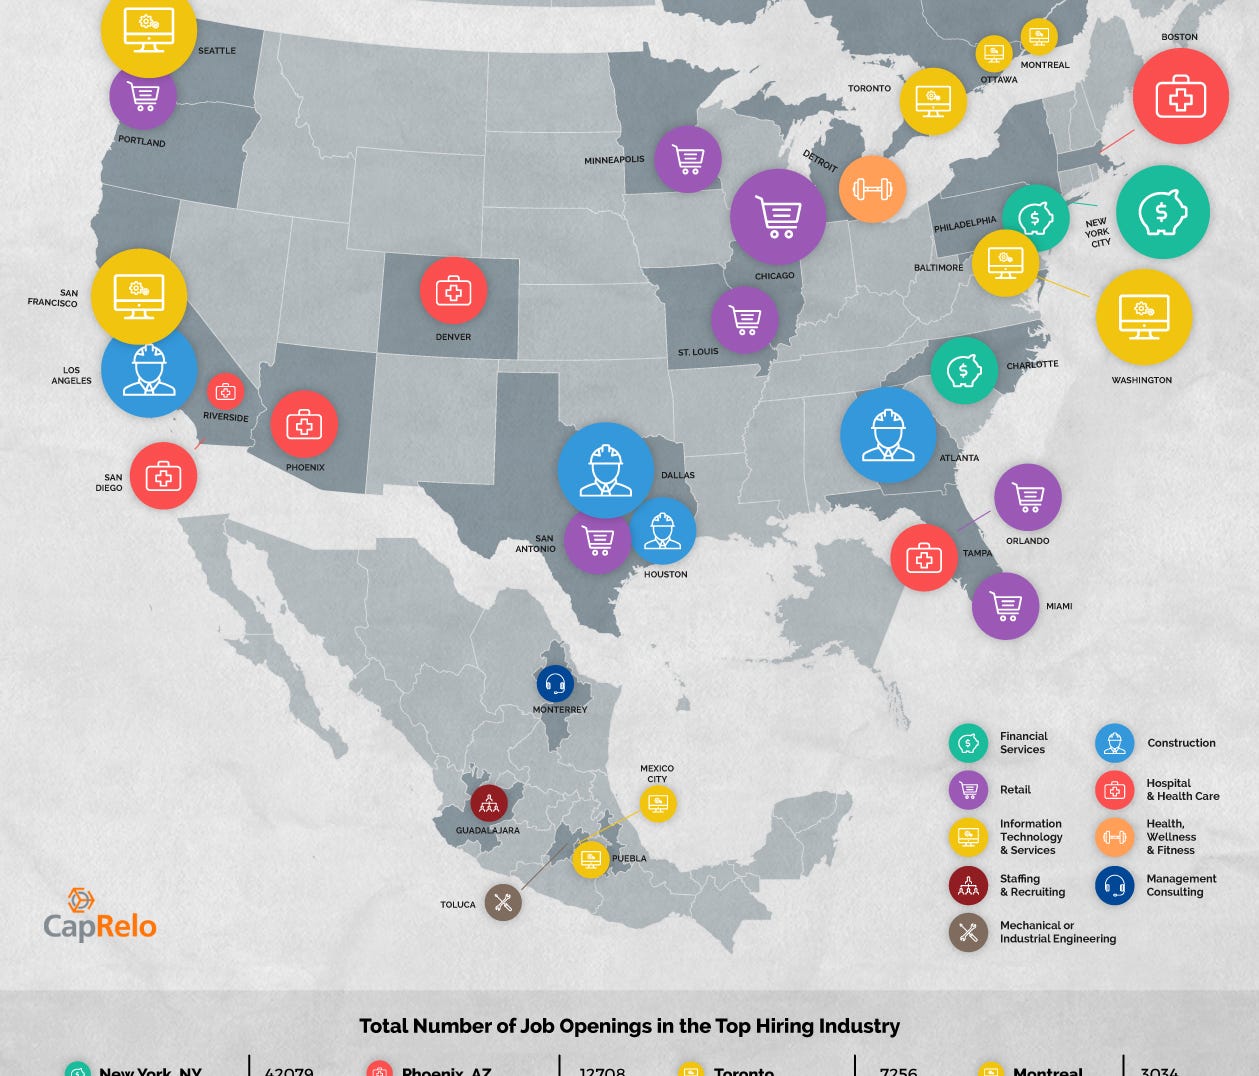 Map depicting largest hiring industries in top 25 metropolitan areas of the U.S., and top 5 in Canada and Mexico, based on information gathered from LinkedIn.